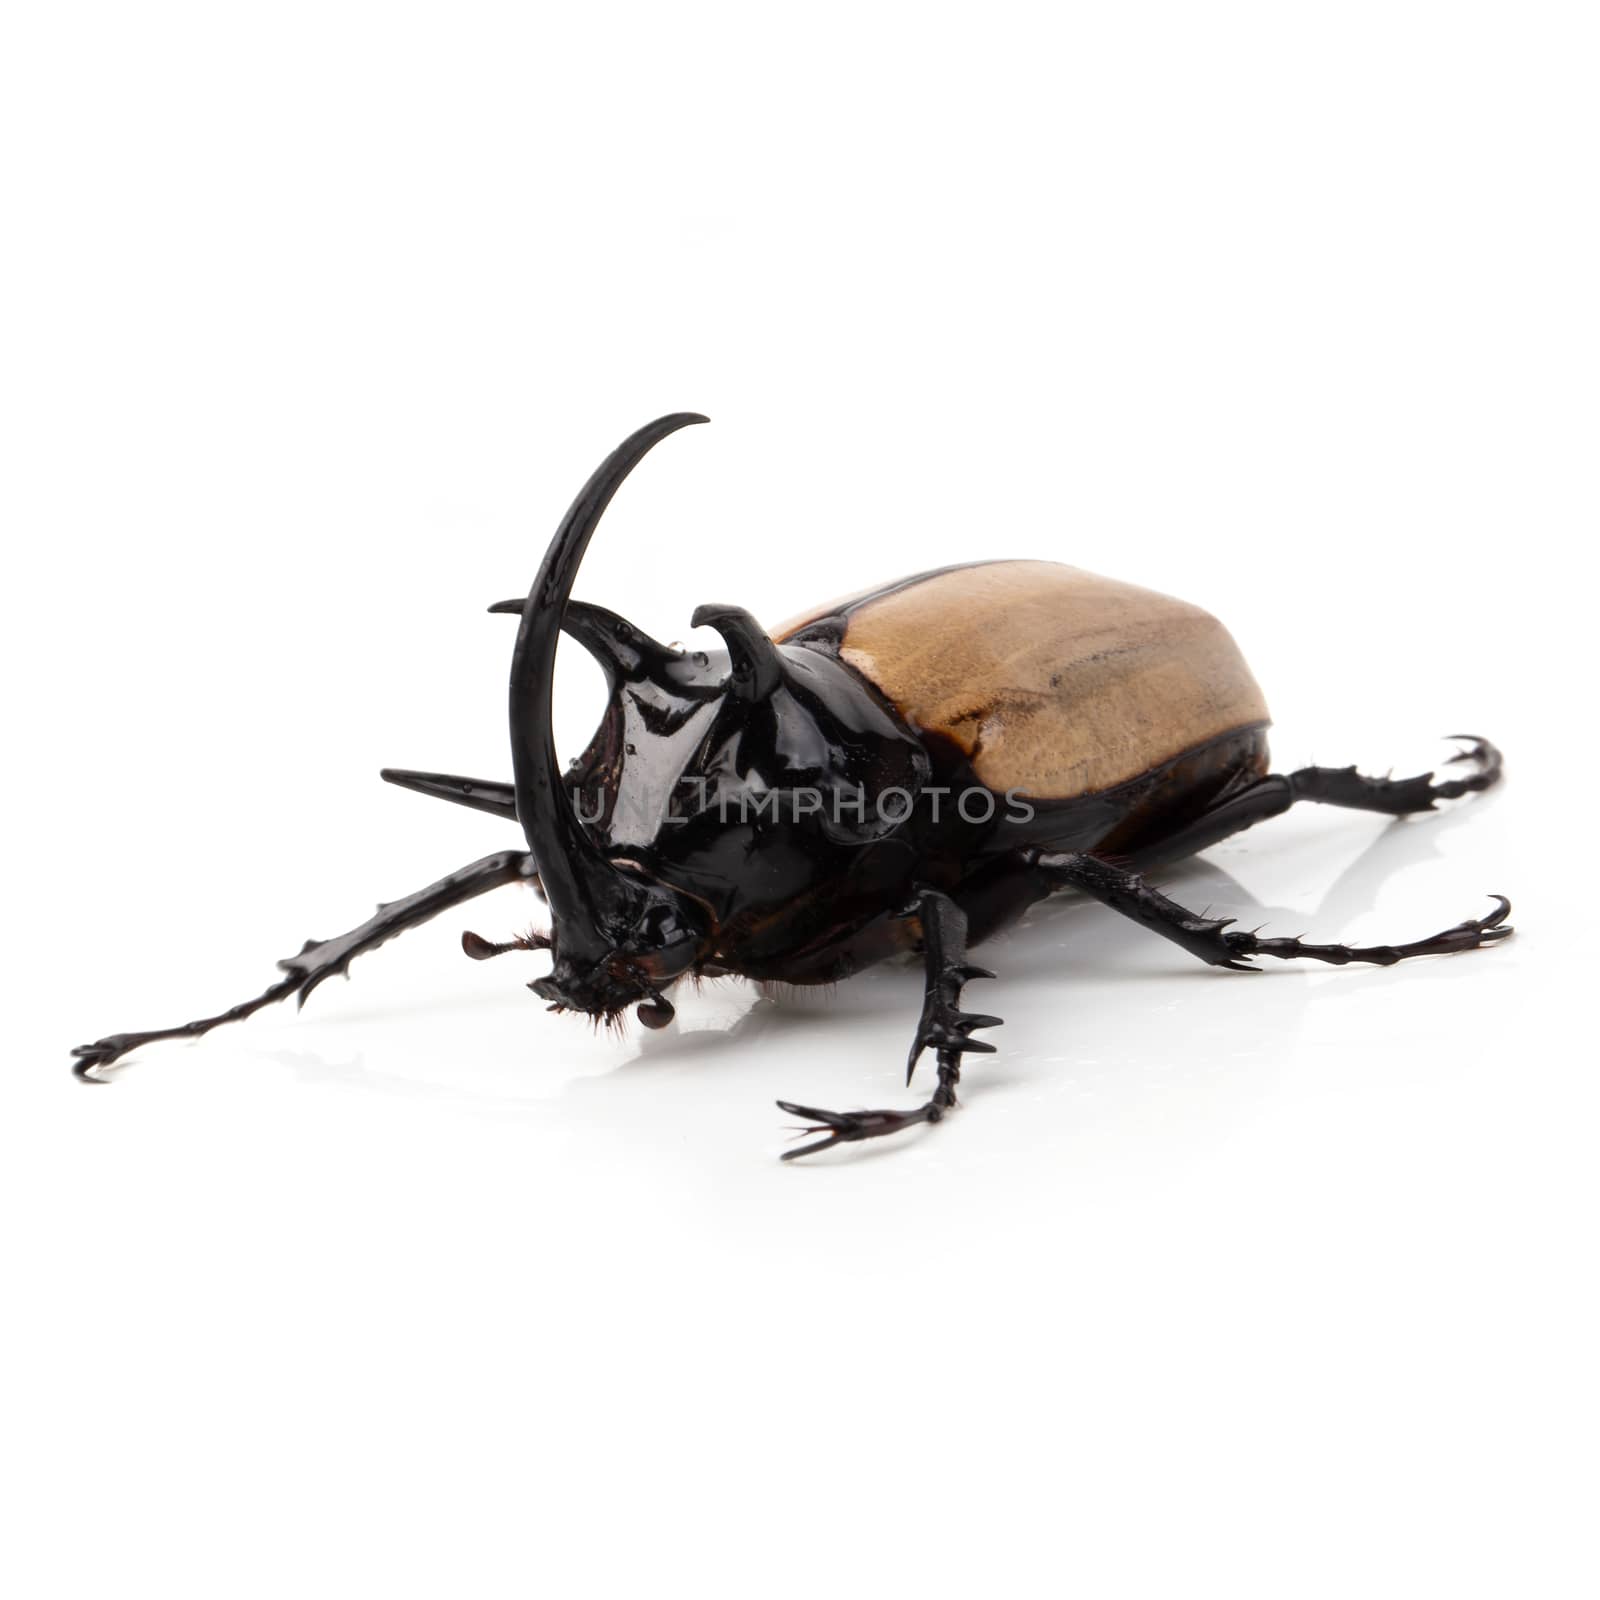 Yellow Five-horned rhinoceros beetle isolated on white background.